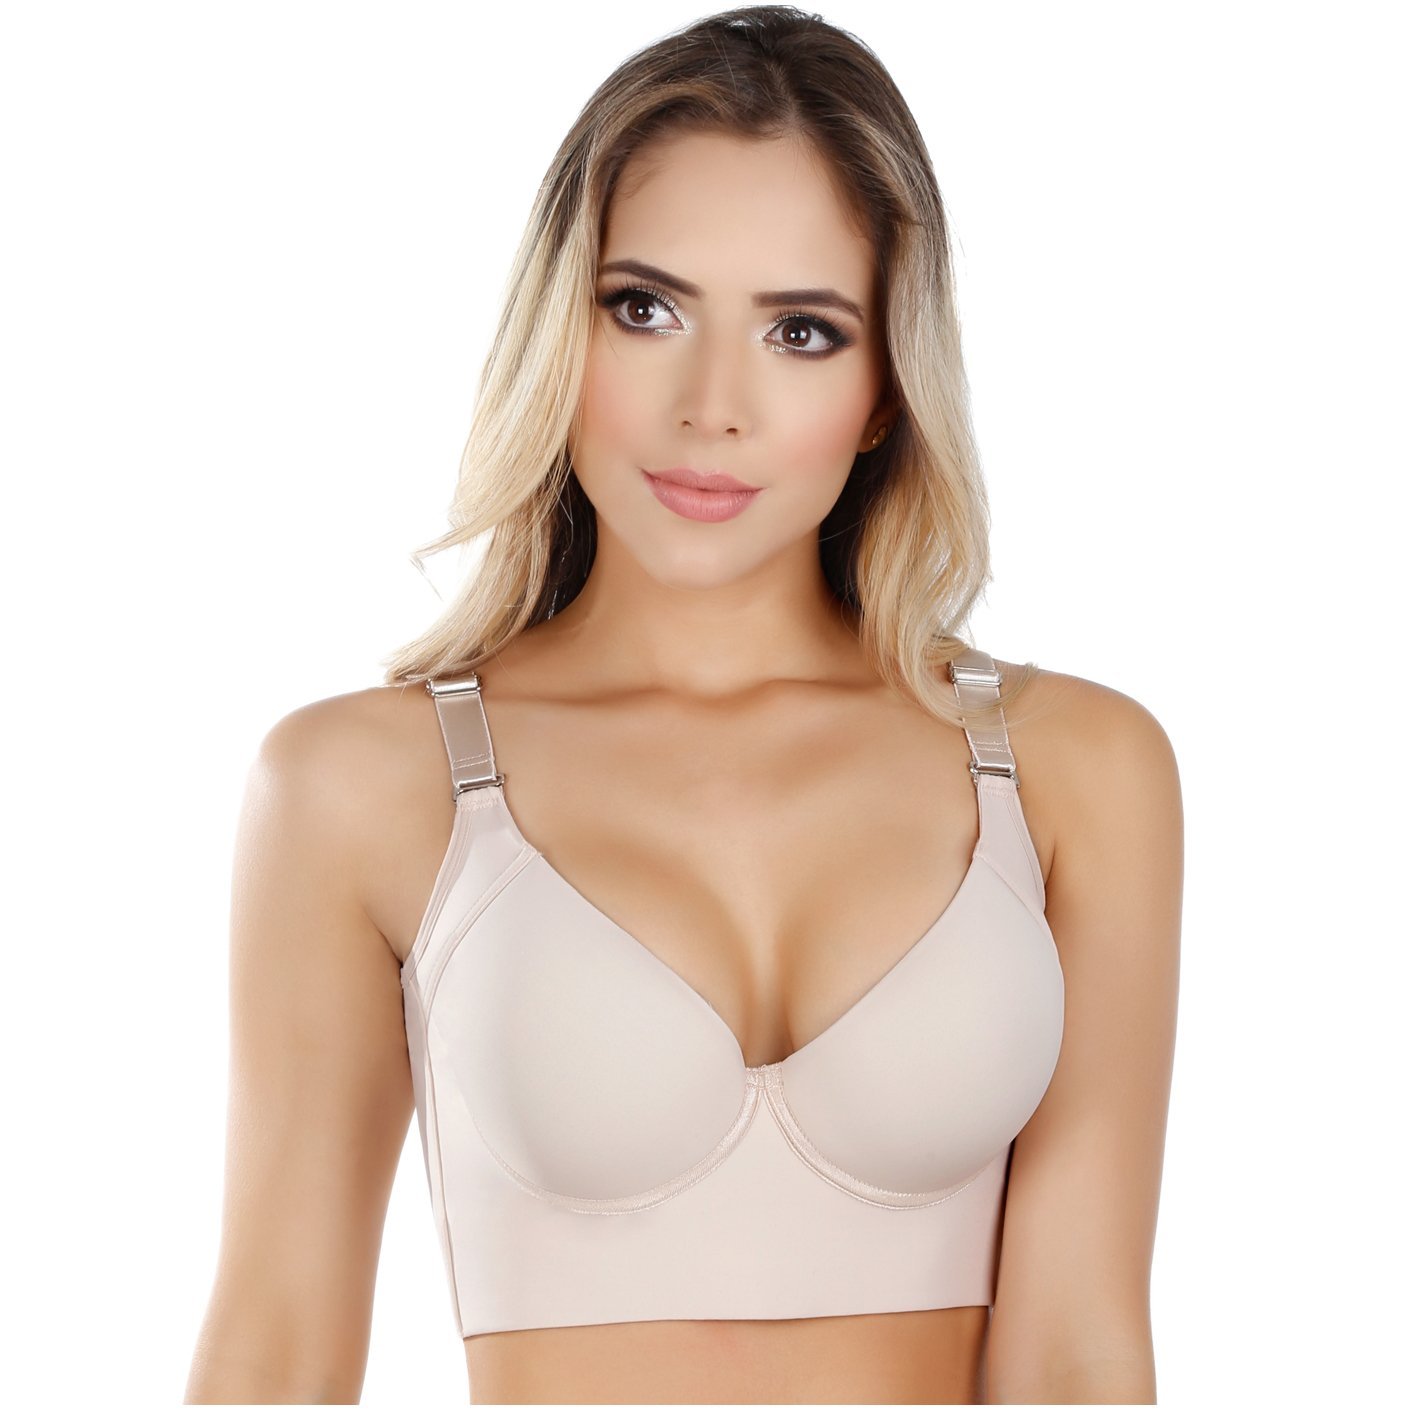 UPLADY 8542 EXTRA FIRM CONTROL FULL CUP BRA WITH SIDE SUPPORT